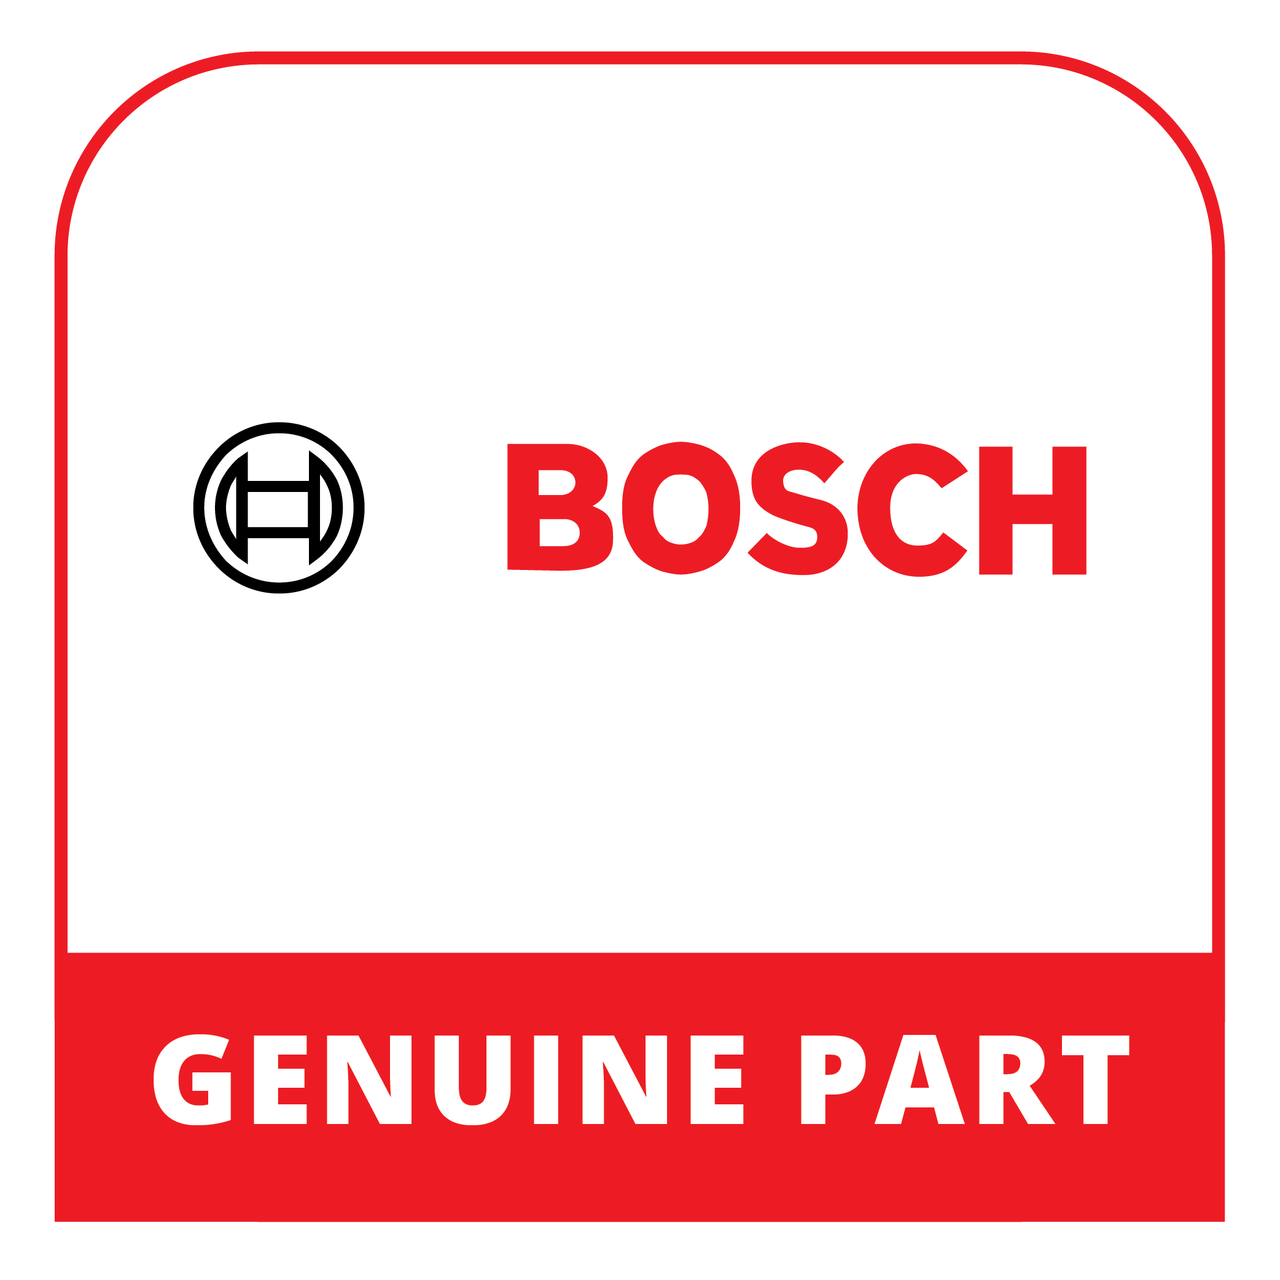 Bosch (Thermador) 17006999 - Keep-Fresh Box Set - Genuine Bosch (Thermador) Part